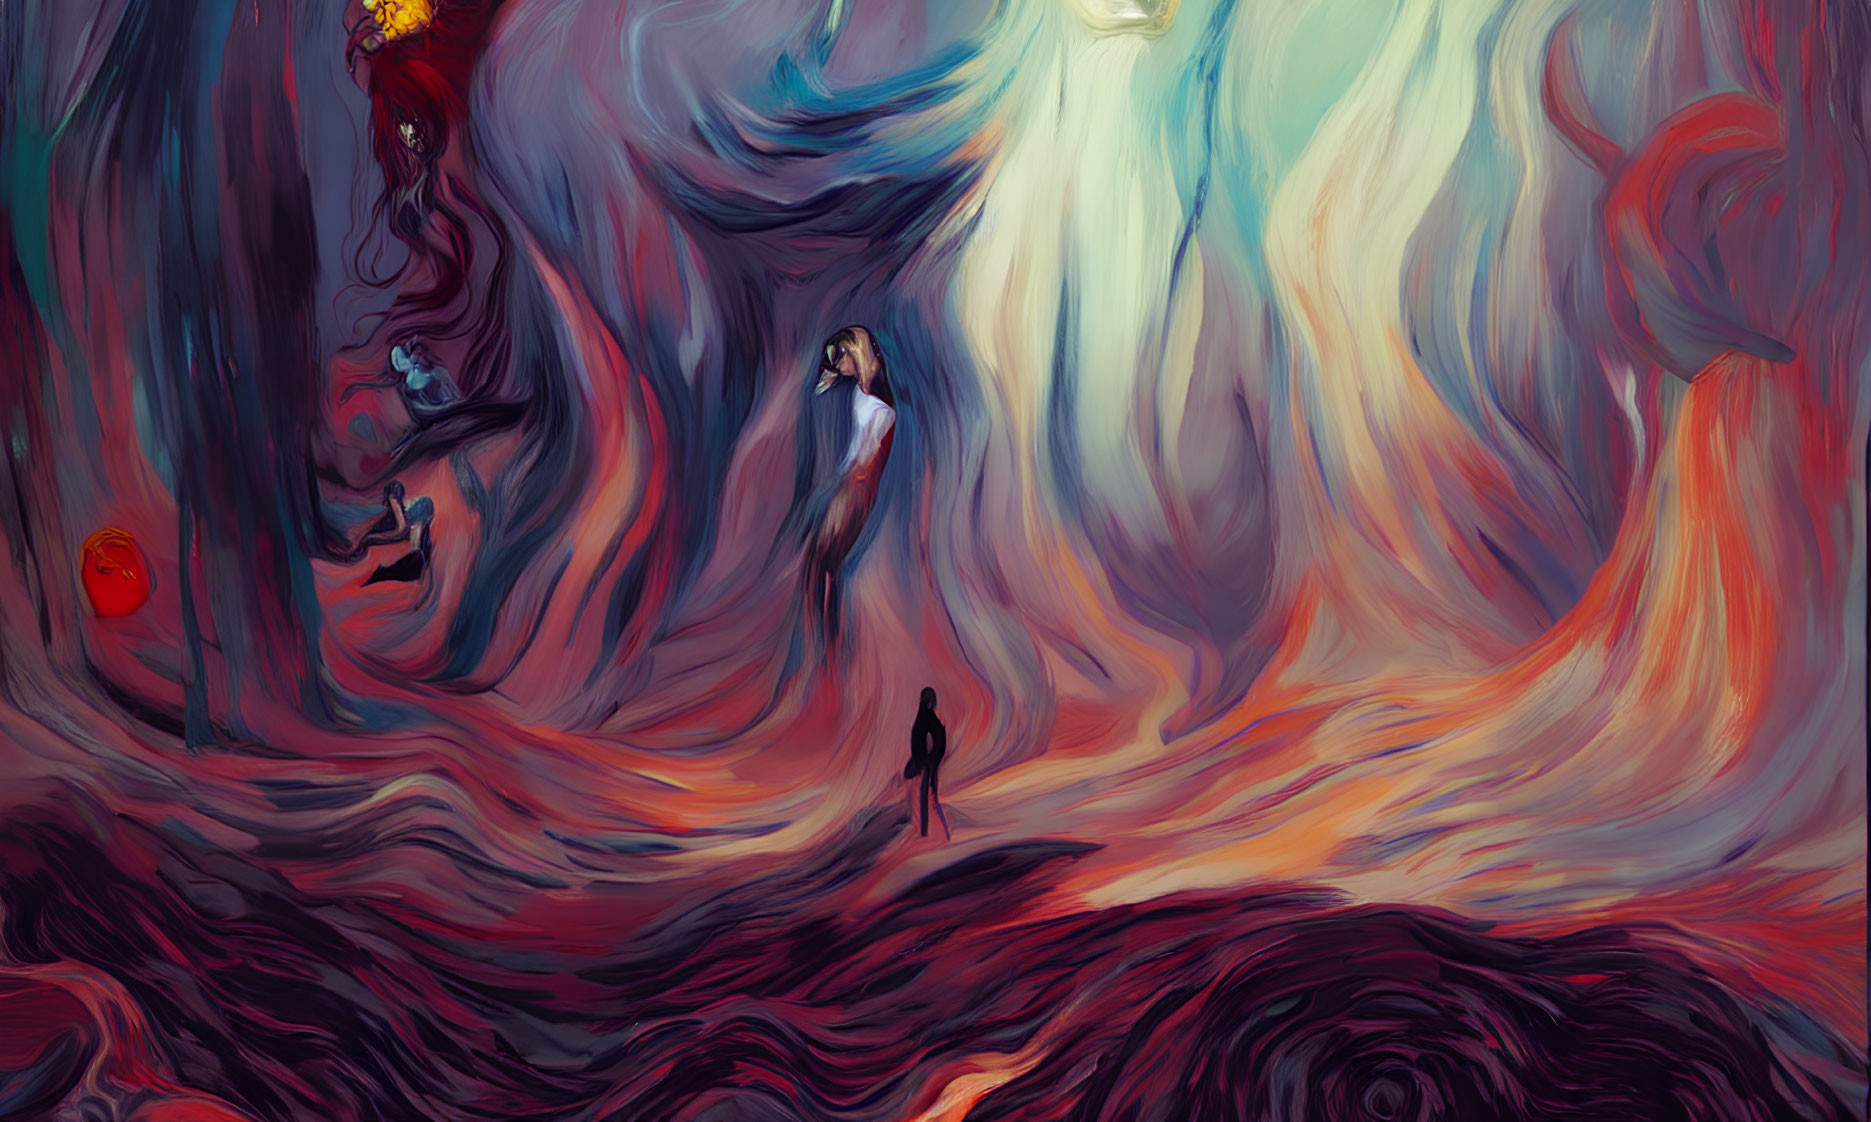 Surreal painting with swirling red and blue hues and human figure facing abstract face